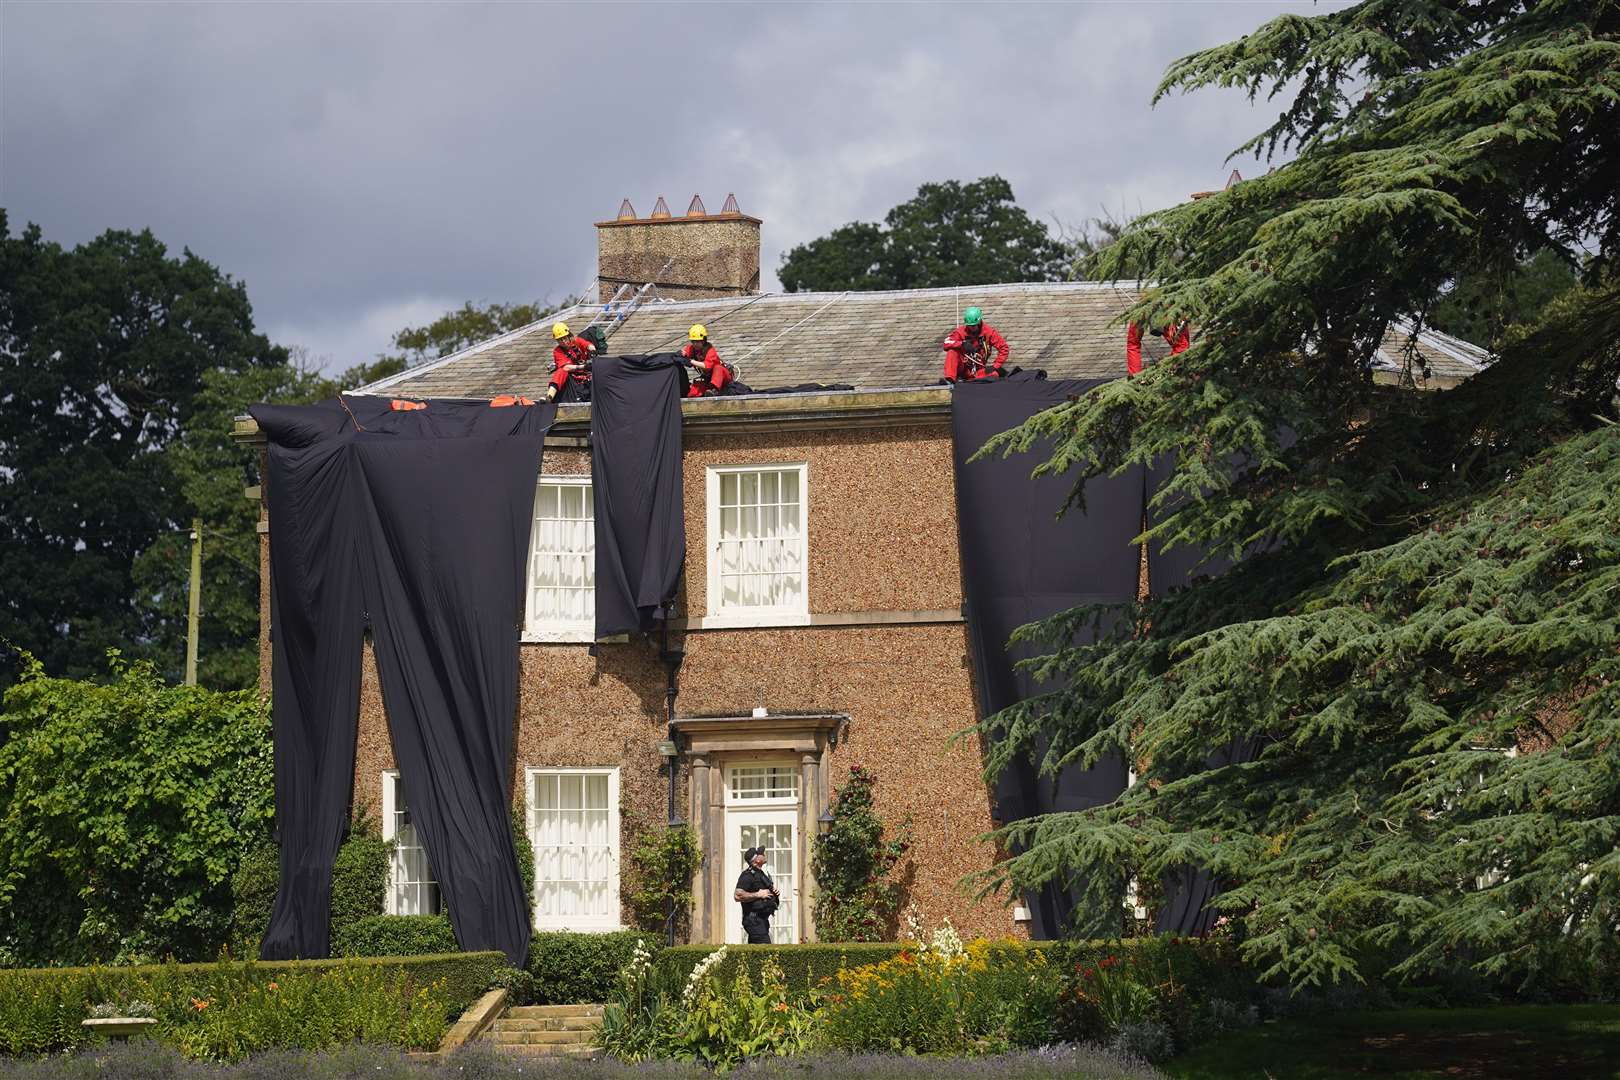 Greenpeace activists moving fabric on the roof of Rishi Sunak’s house in Richmond, North Yorkshire (Danny Lawson/PA)